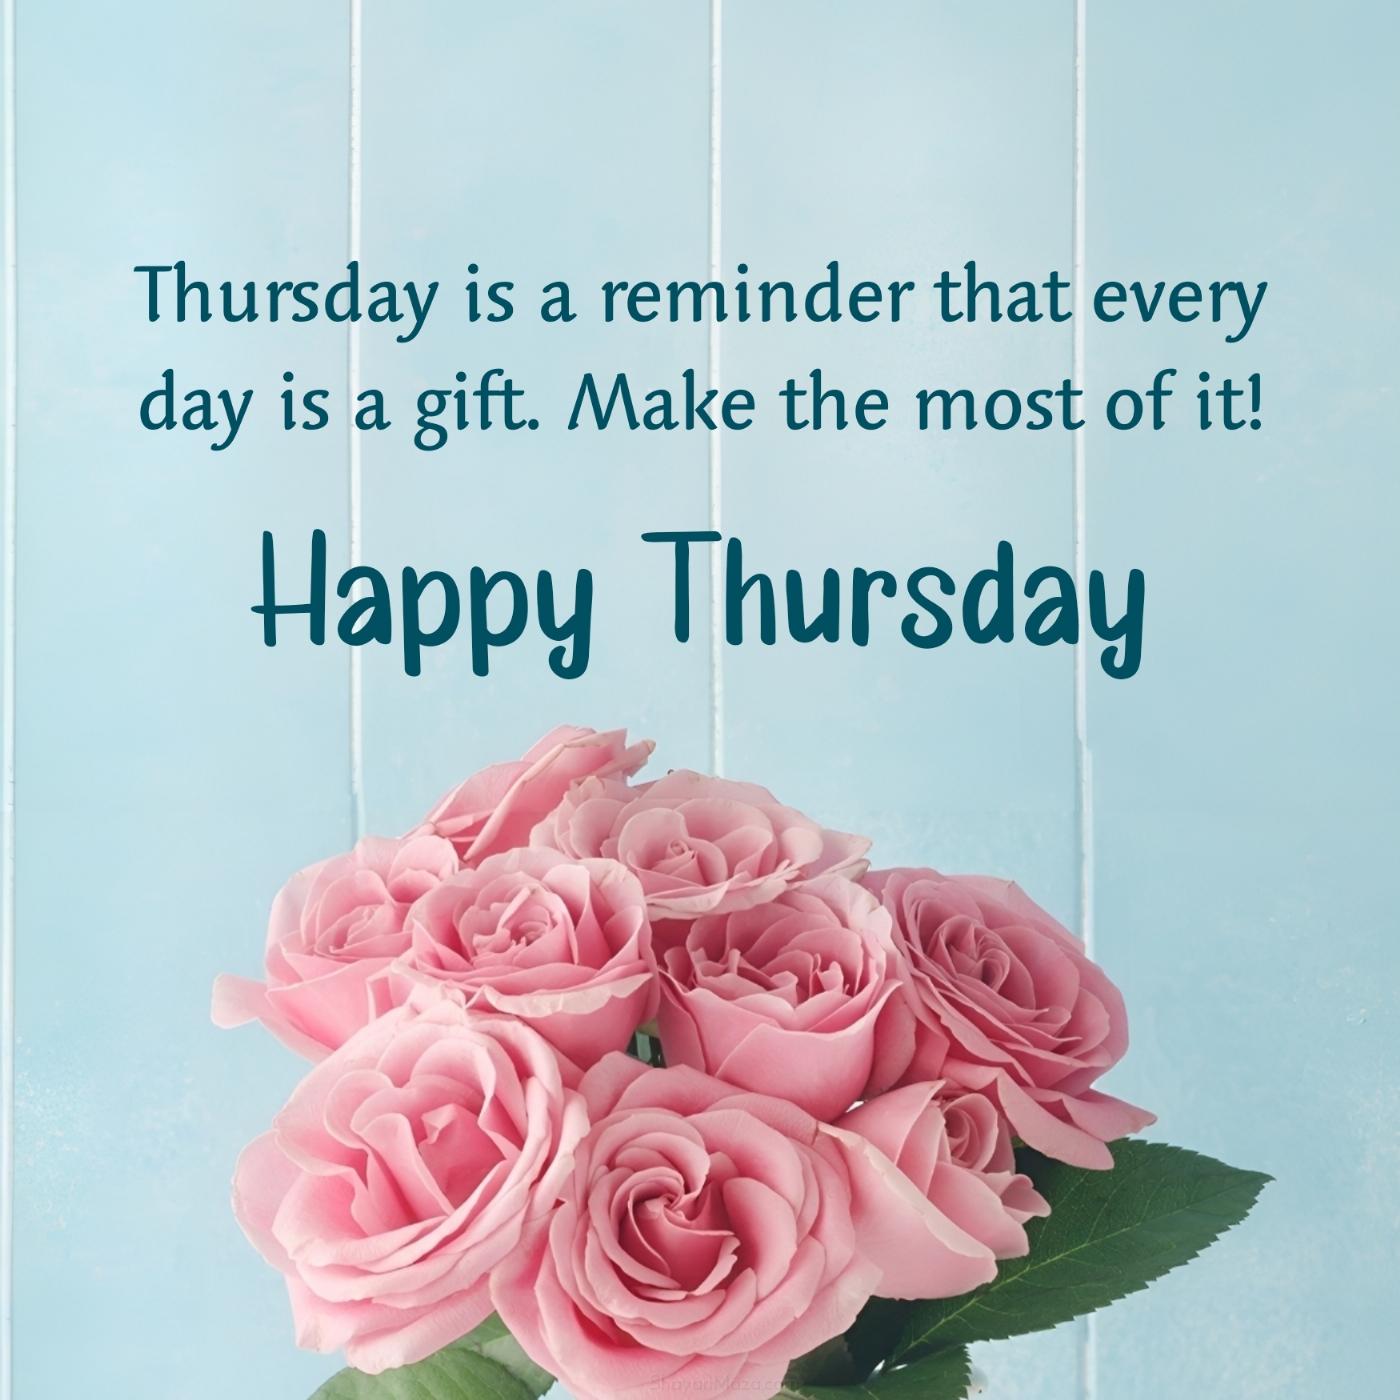 Thursday is a reminder that every day is a gift